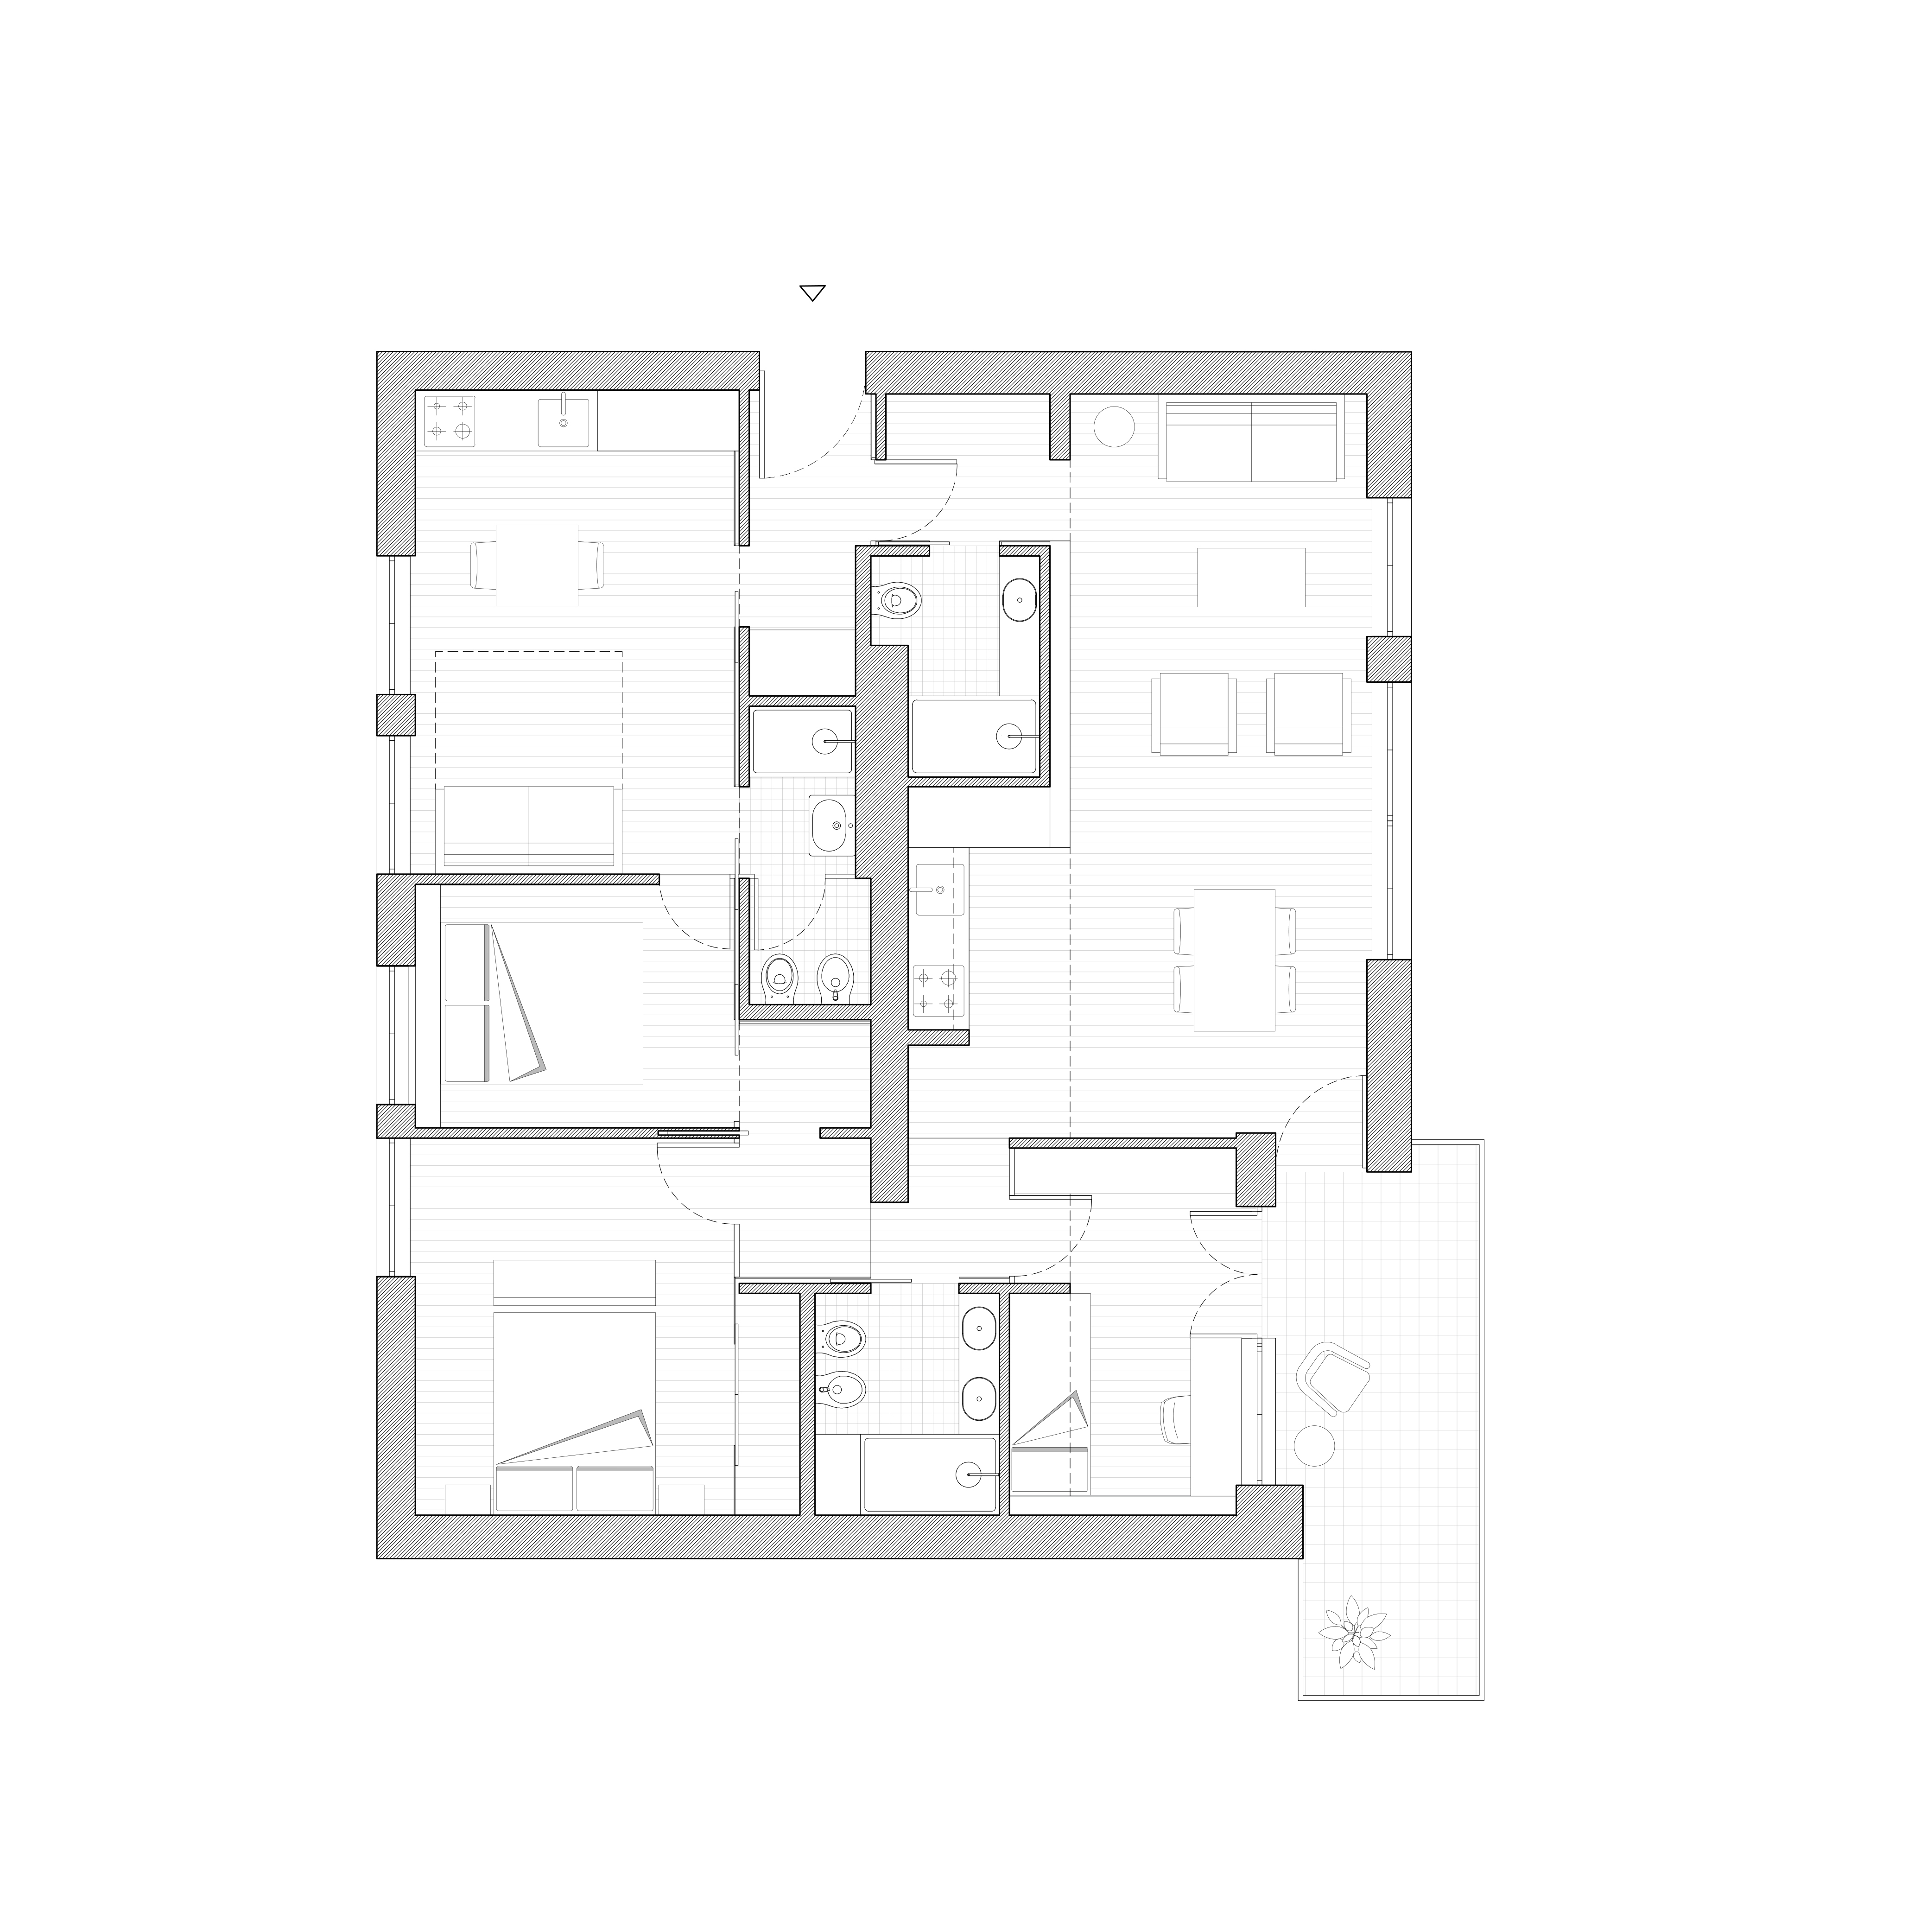 Canazei apartment redesigned plan